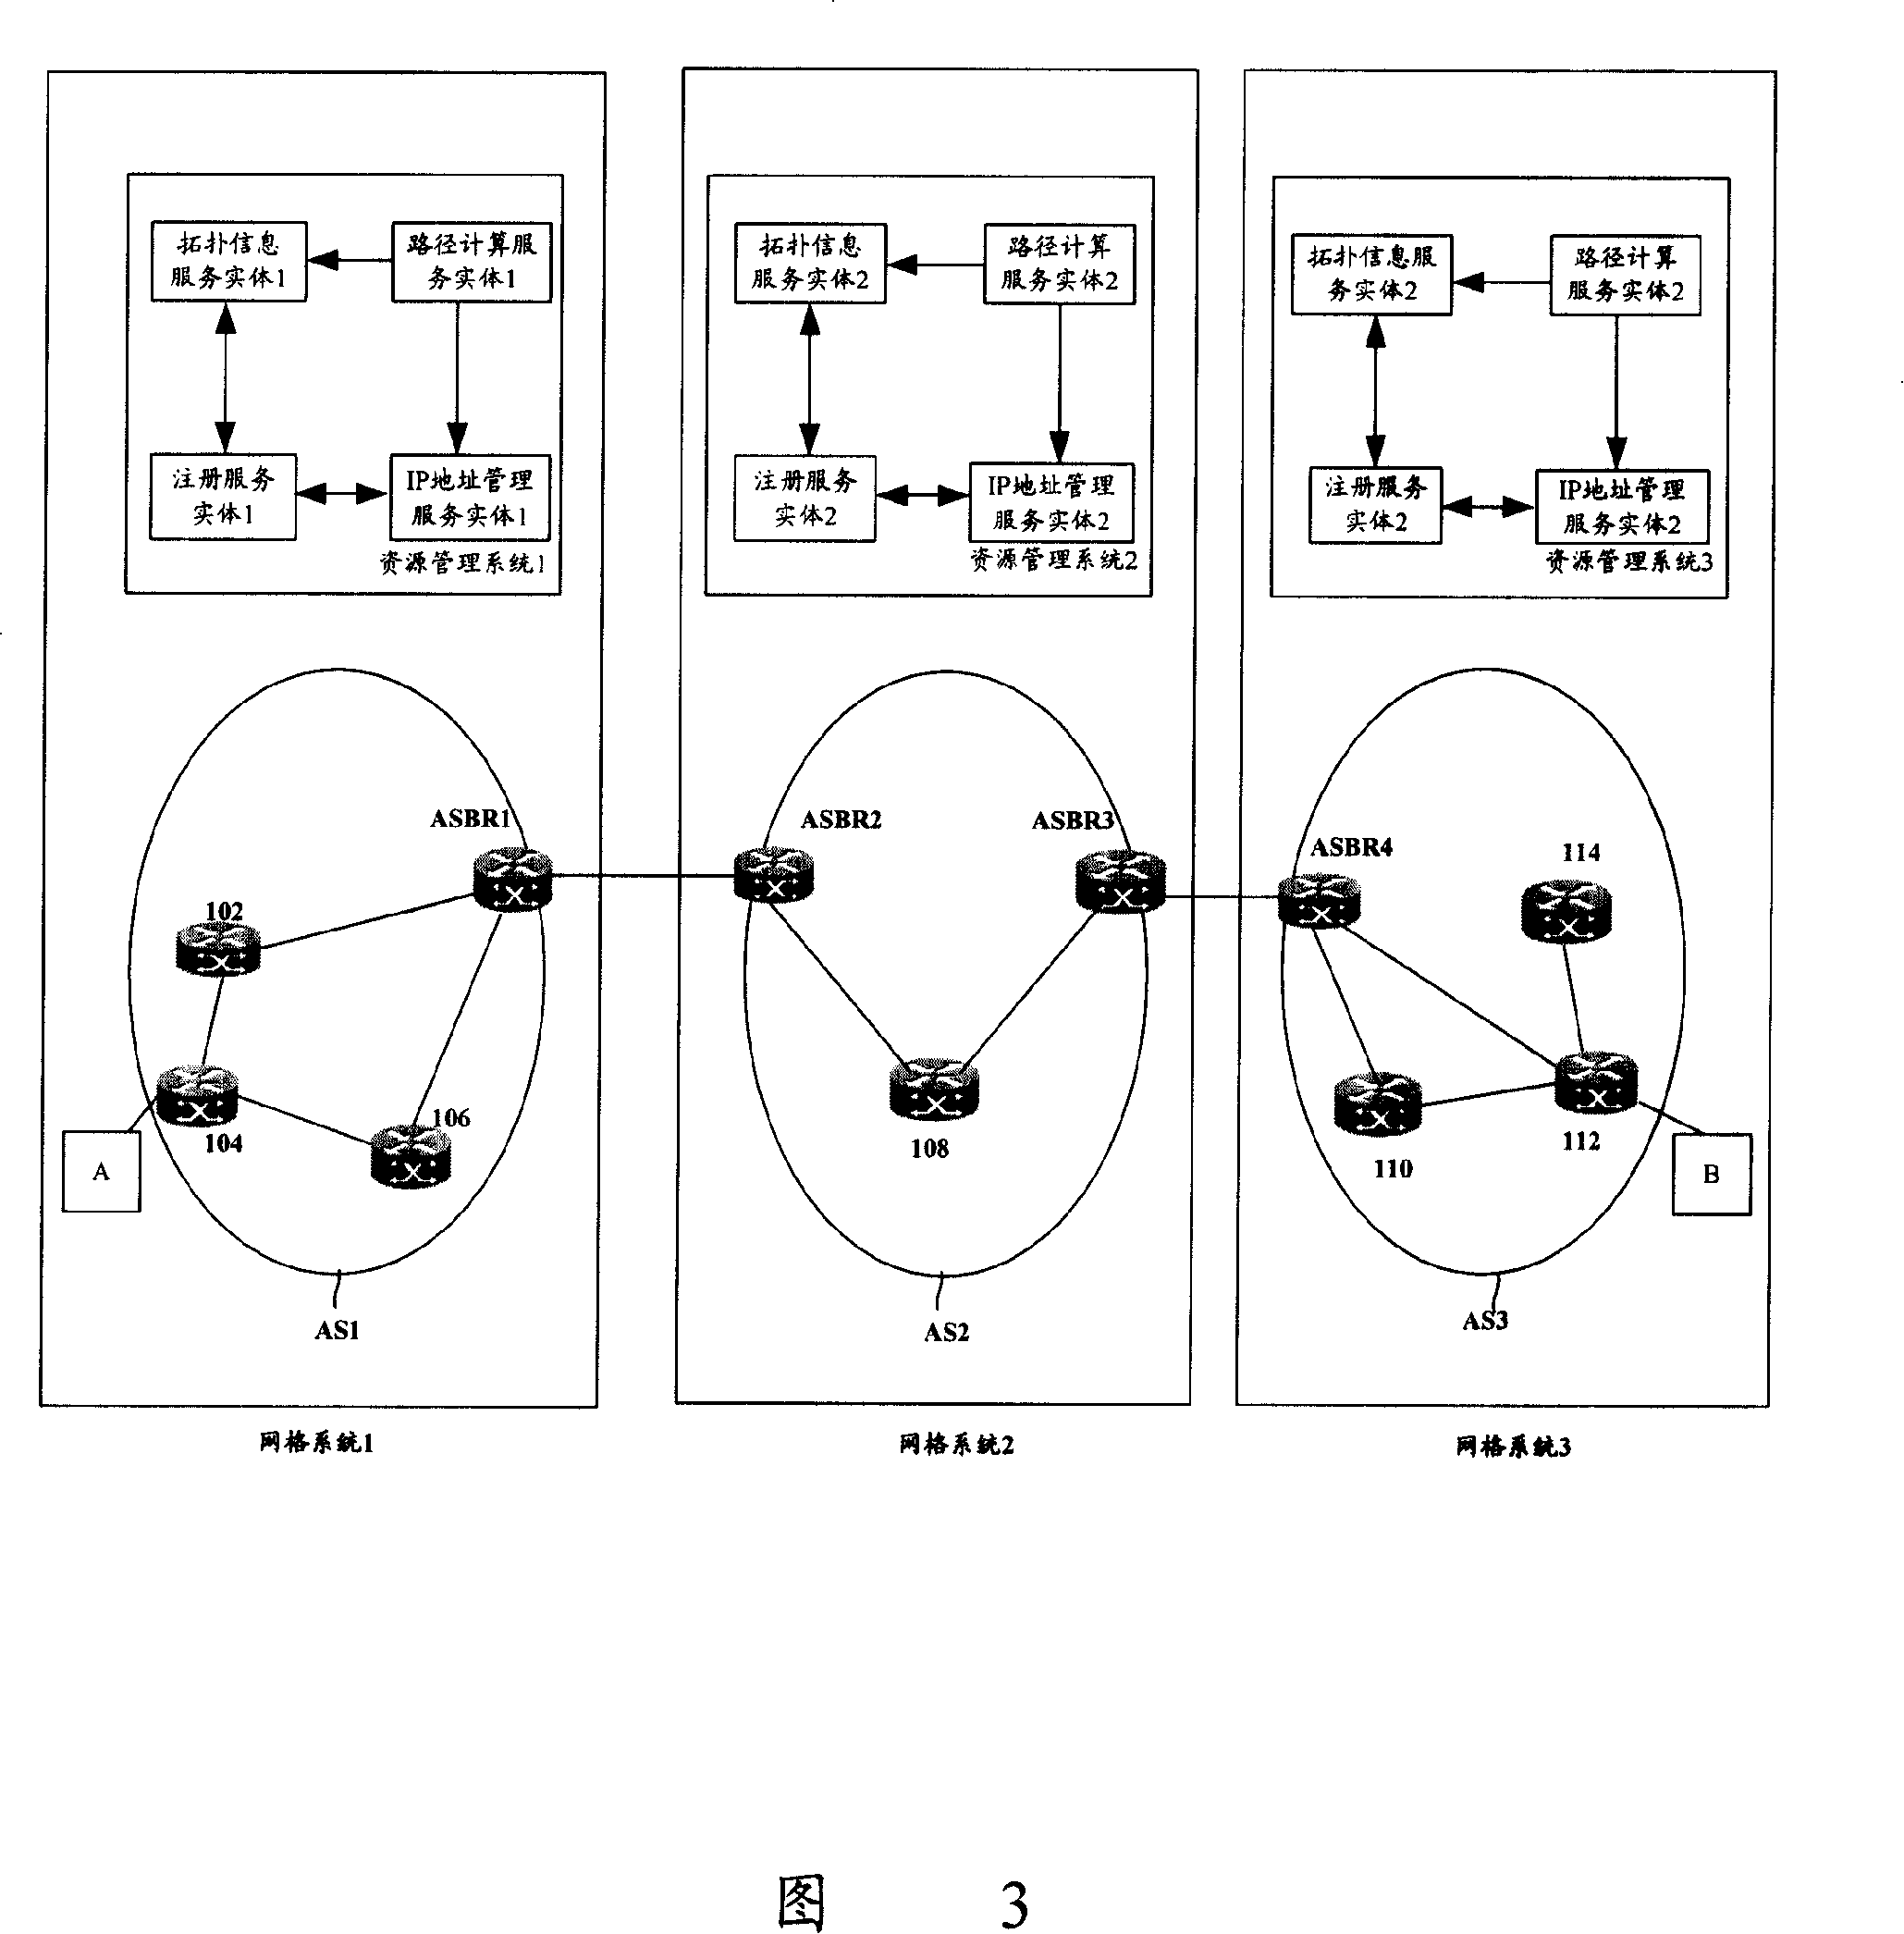 Path computation and network topological method, structure, system, entity and router